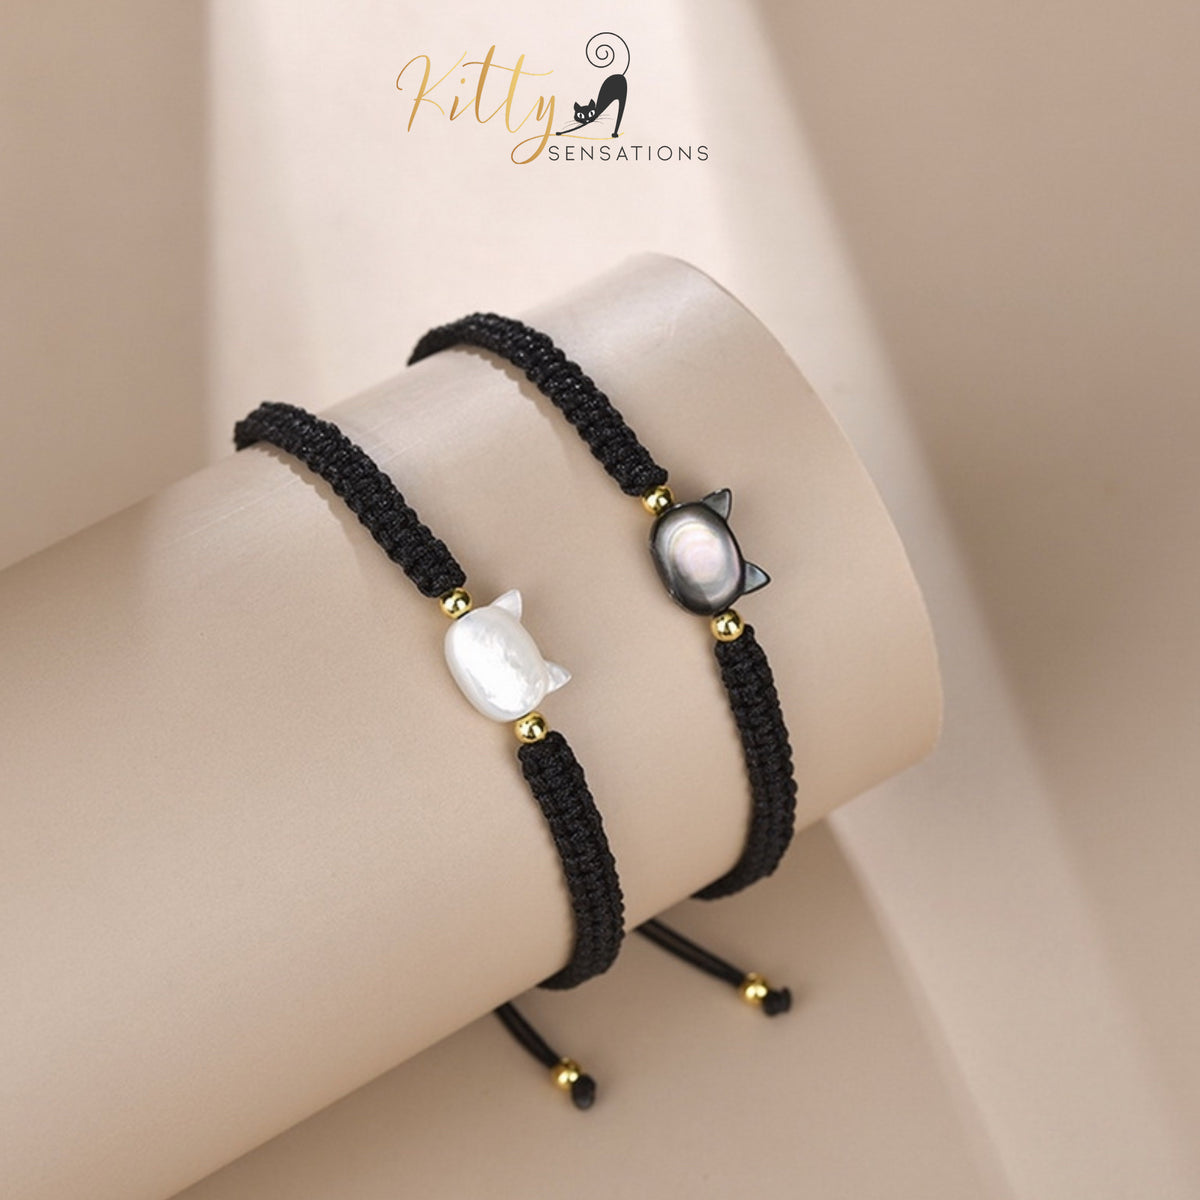 www.KittySensations.com: Natural Mother-of-Pearl and Braided Cord Cat Bracelet (Adjustable Size) ($20.40): https://www.kittysensations.com/products/mother-of-pearl-and-braided-cord-cat-bracelet-adjustable-size